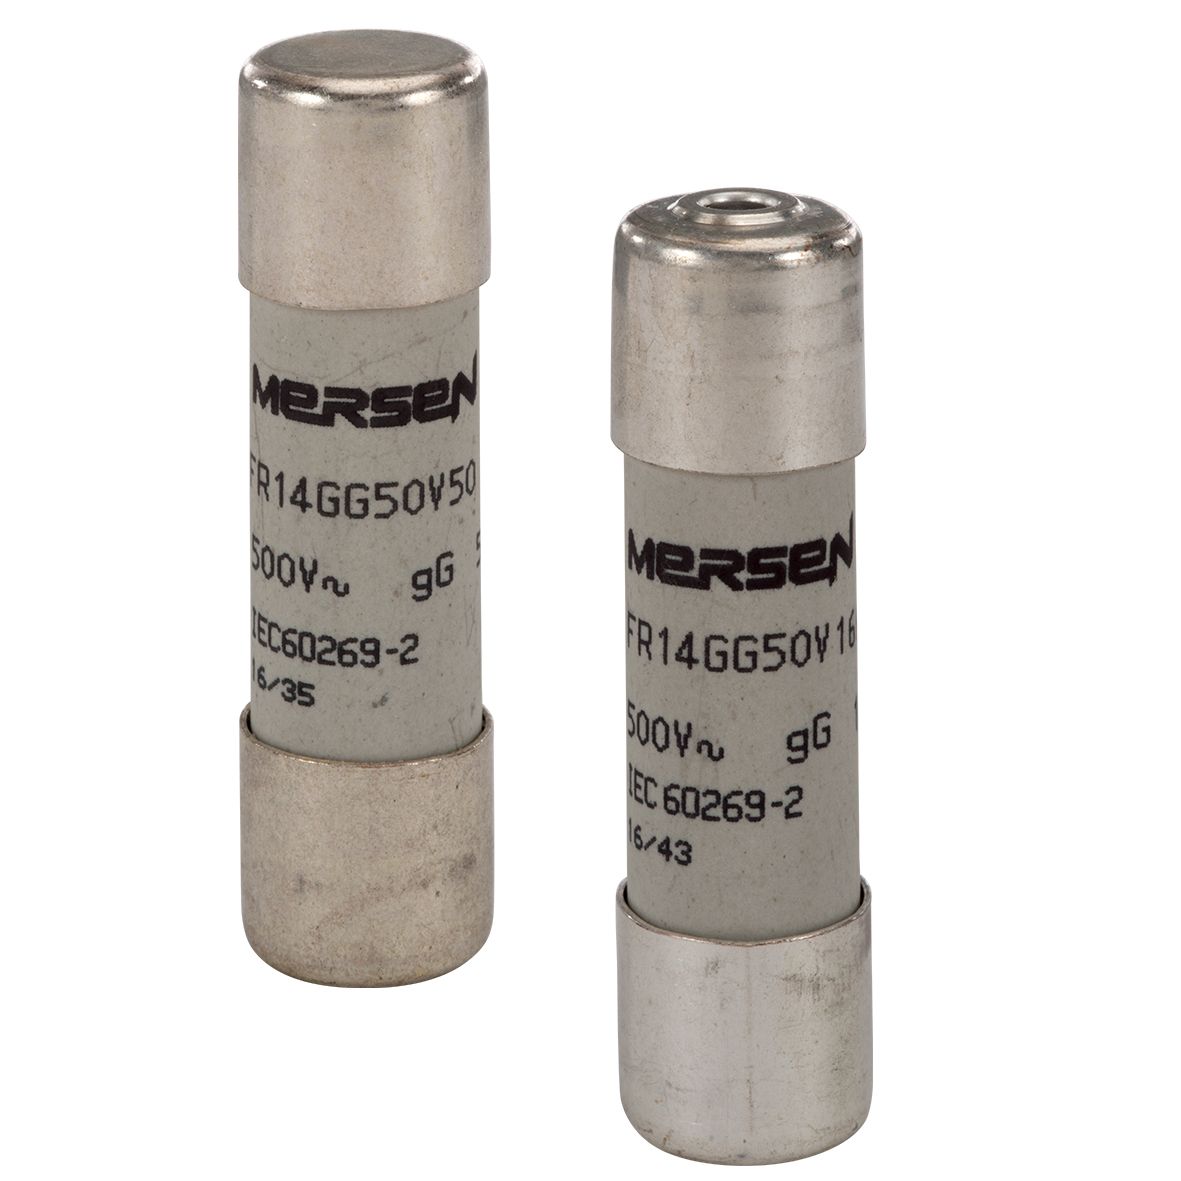 A219765 - Cylindrical fuse-link gG 690VAC 14.3x51, 4A